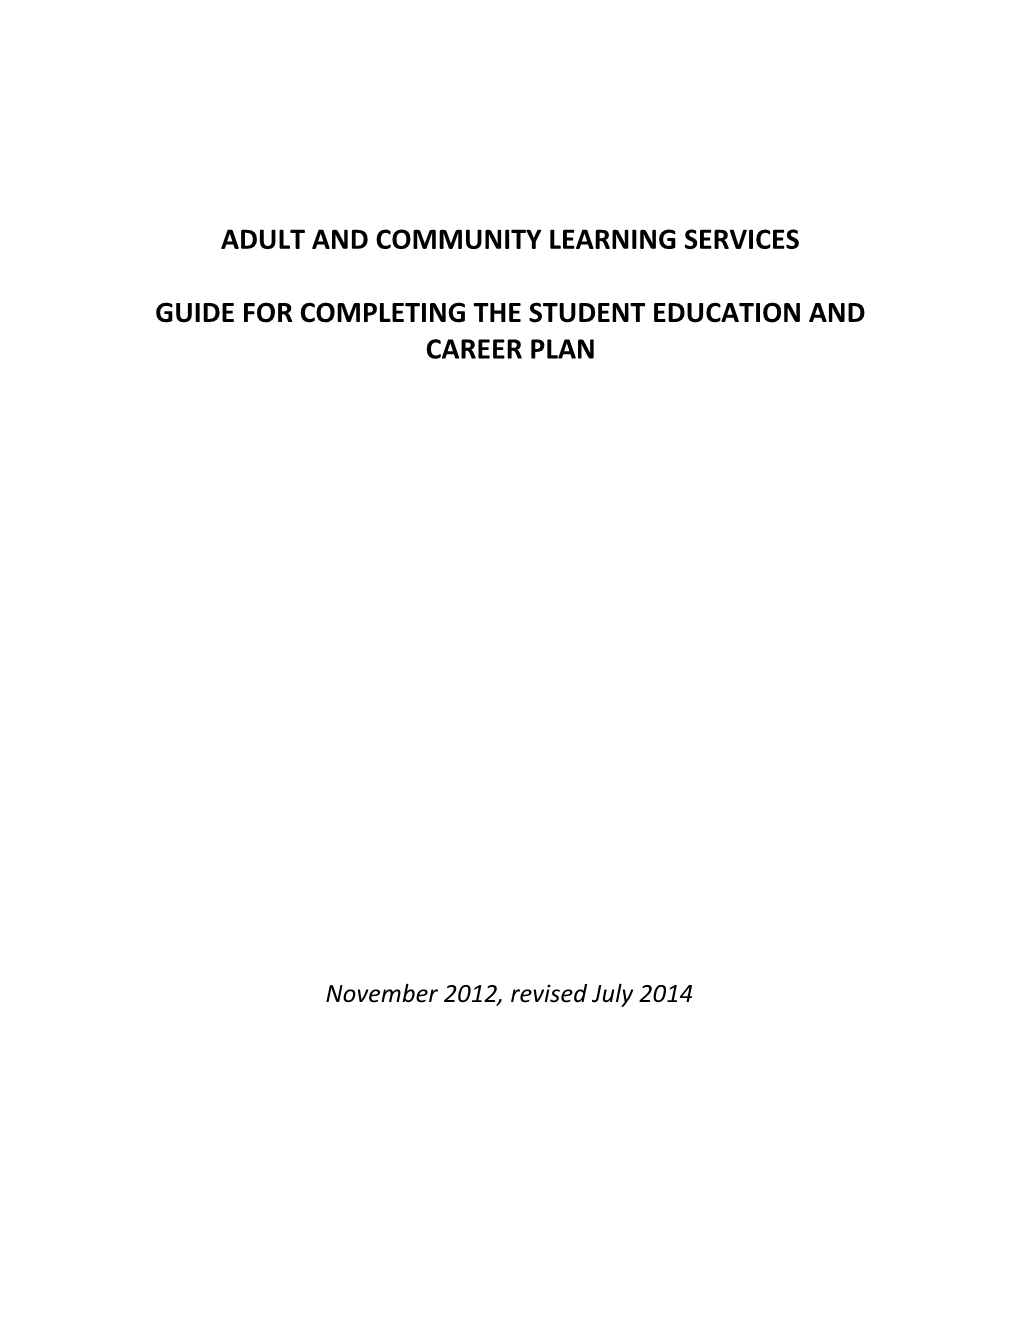 Guide for Education and Career Plan - Adult and Community Learning Services